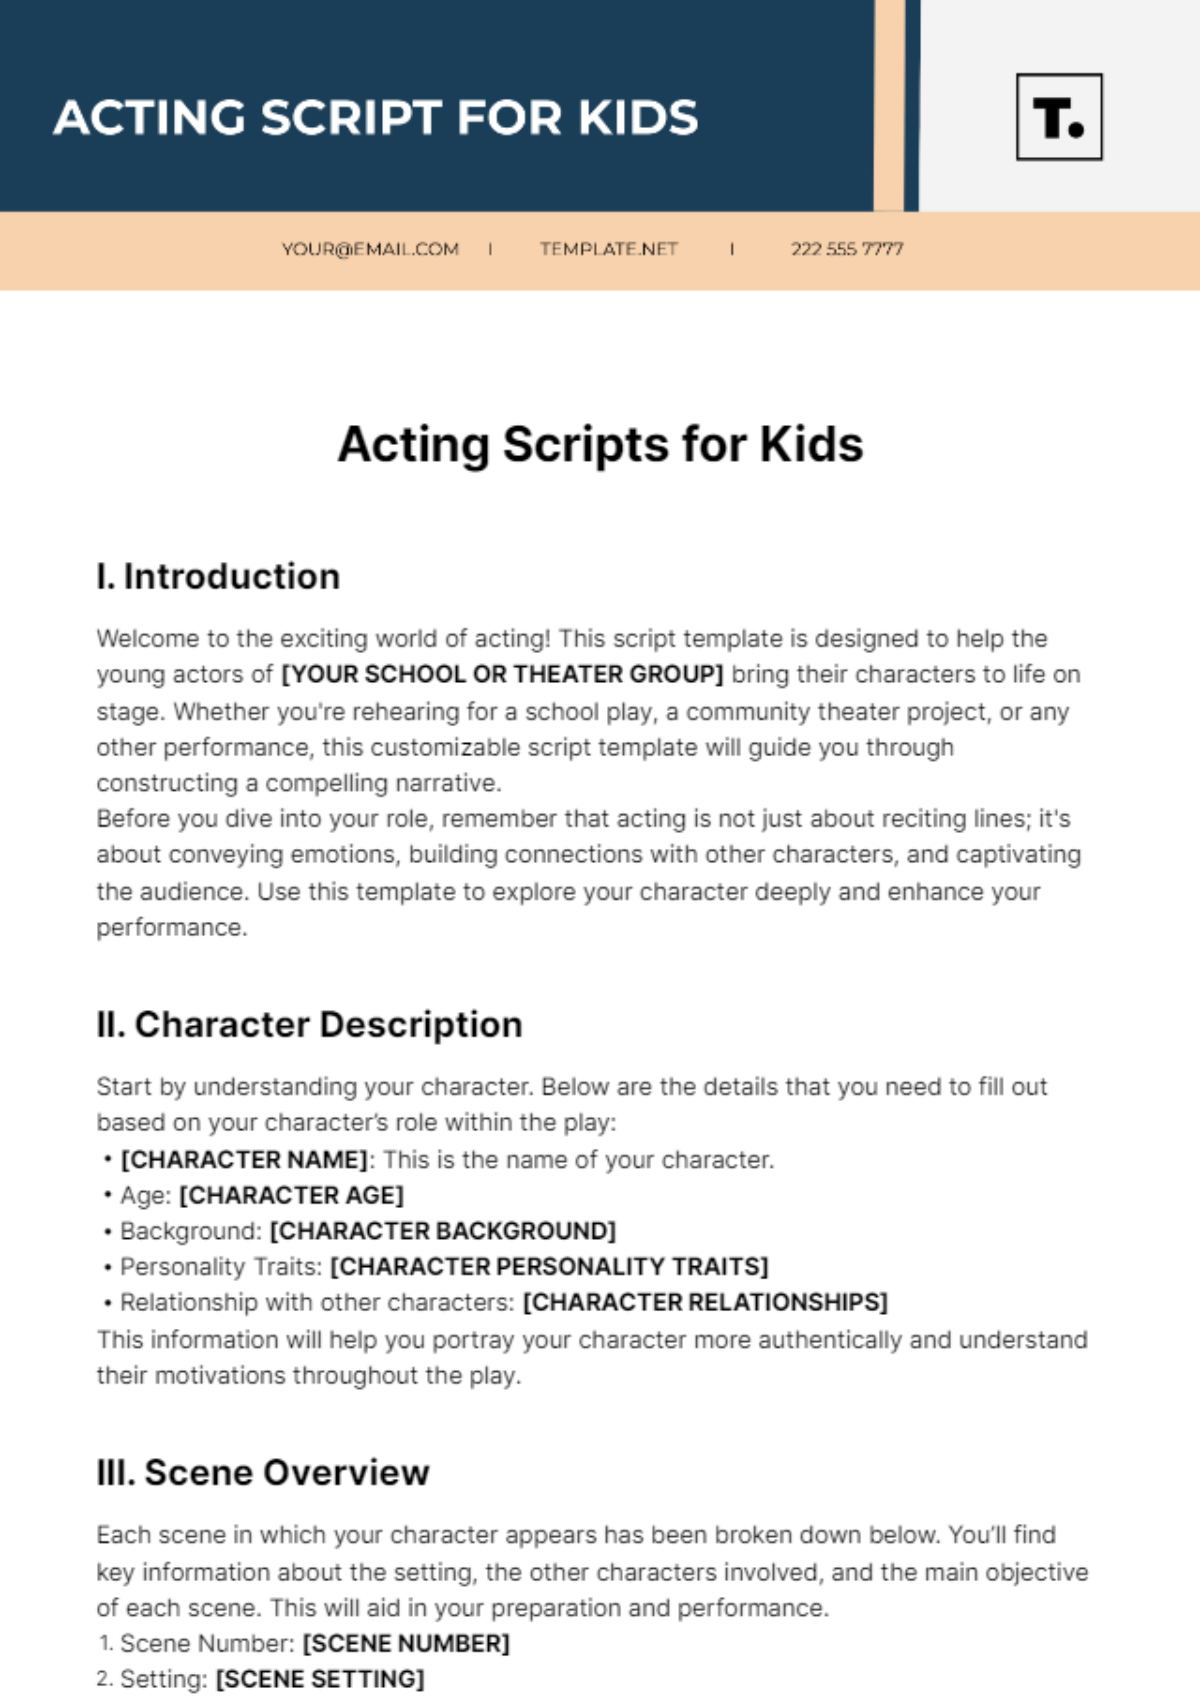 Acting Scripts For Kids Template